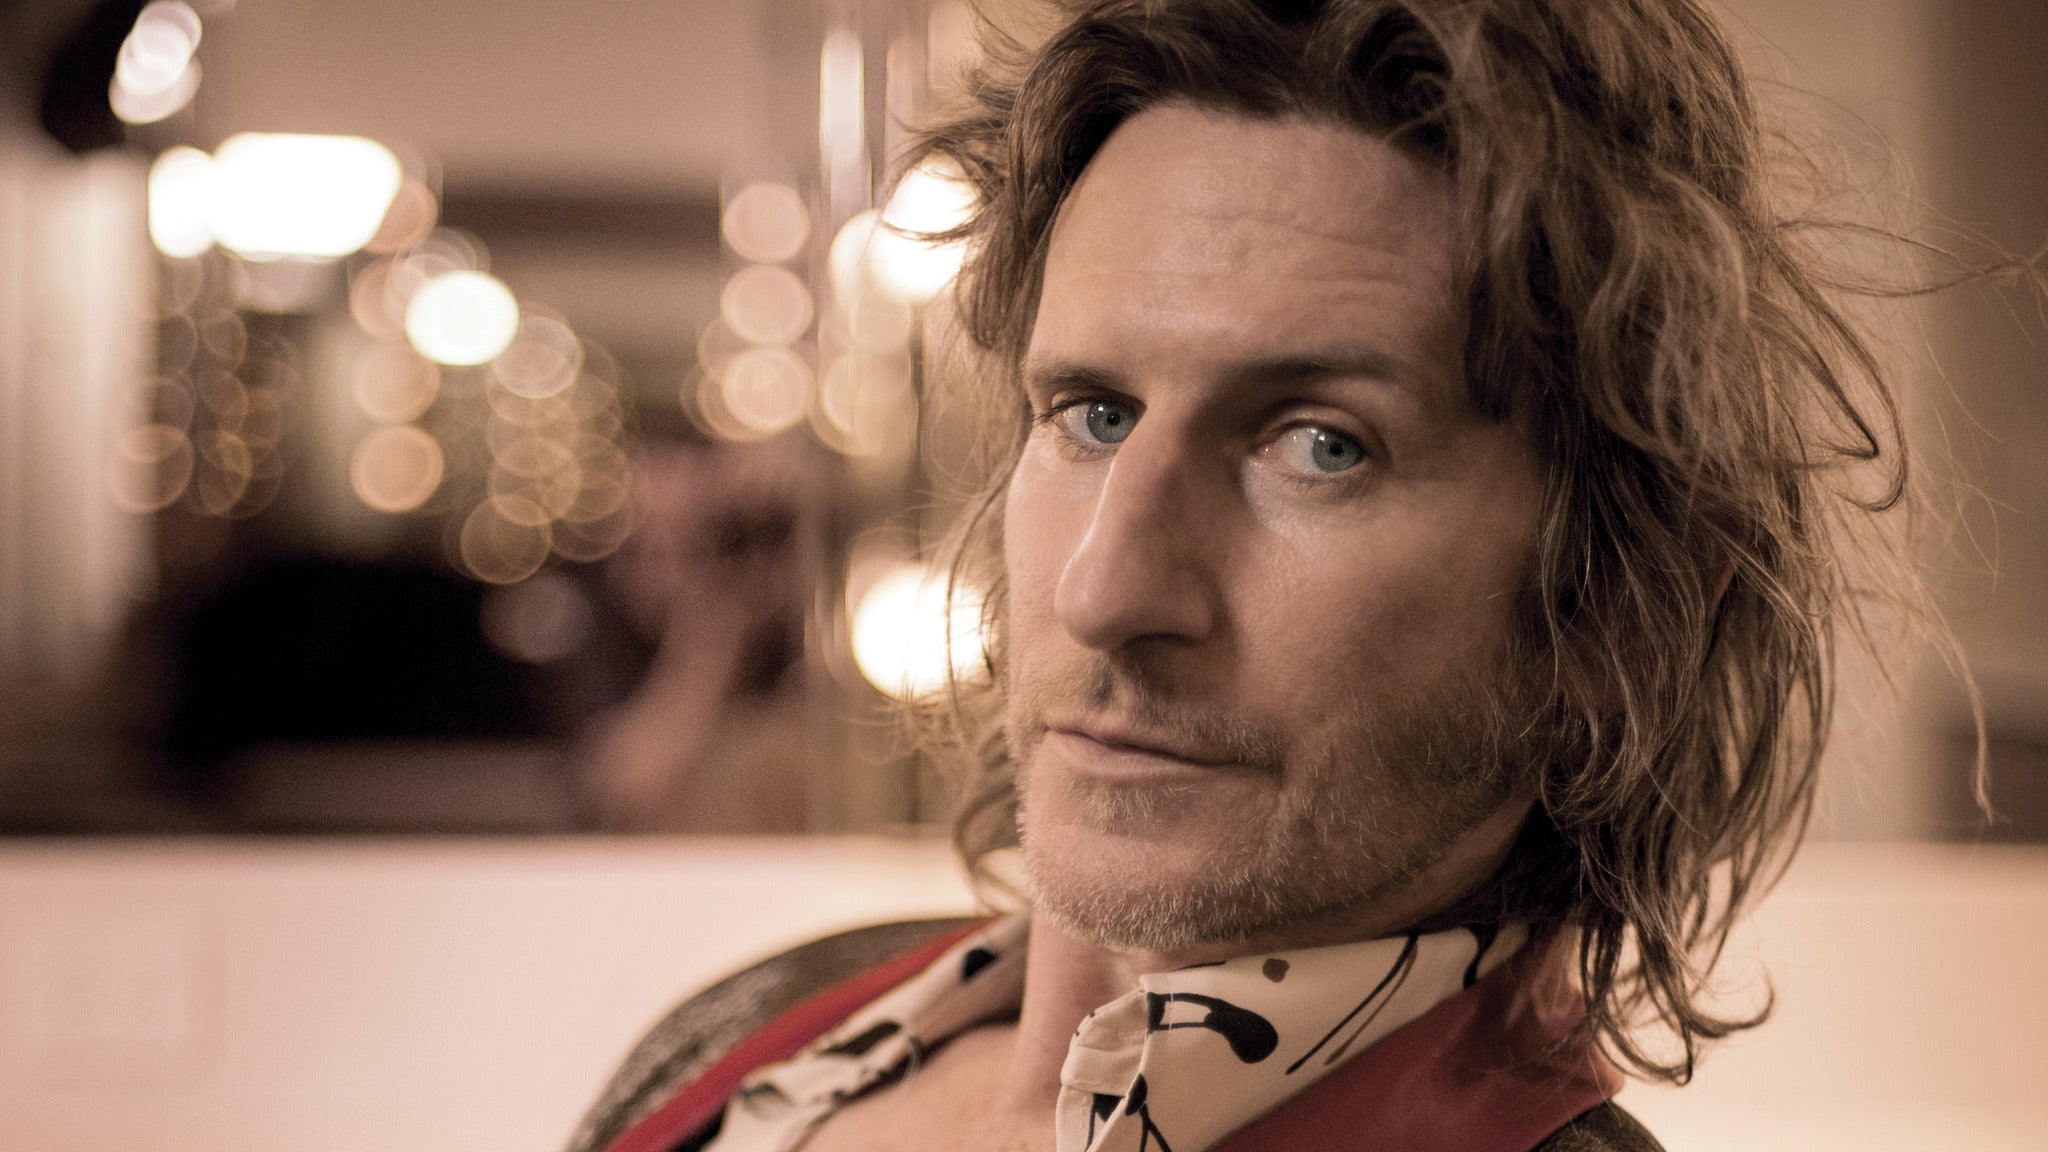 Image used with permission from Ticketmaster | Tim Rogers Liquid Nights in Bohemia Heights tickets